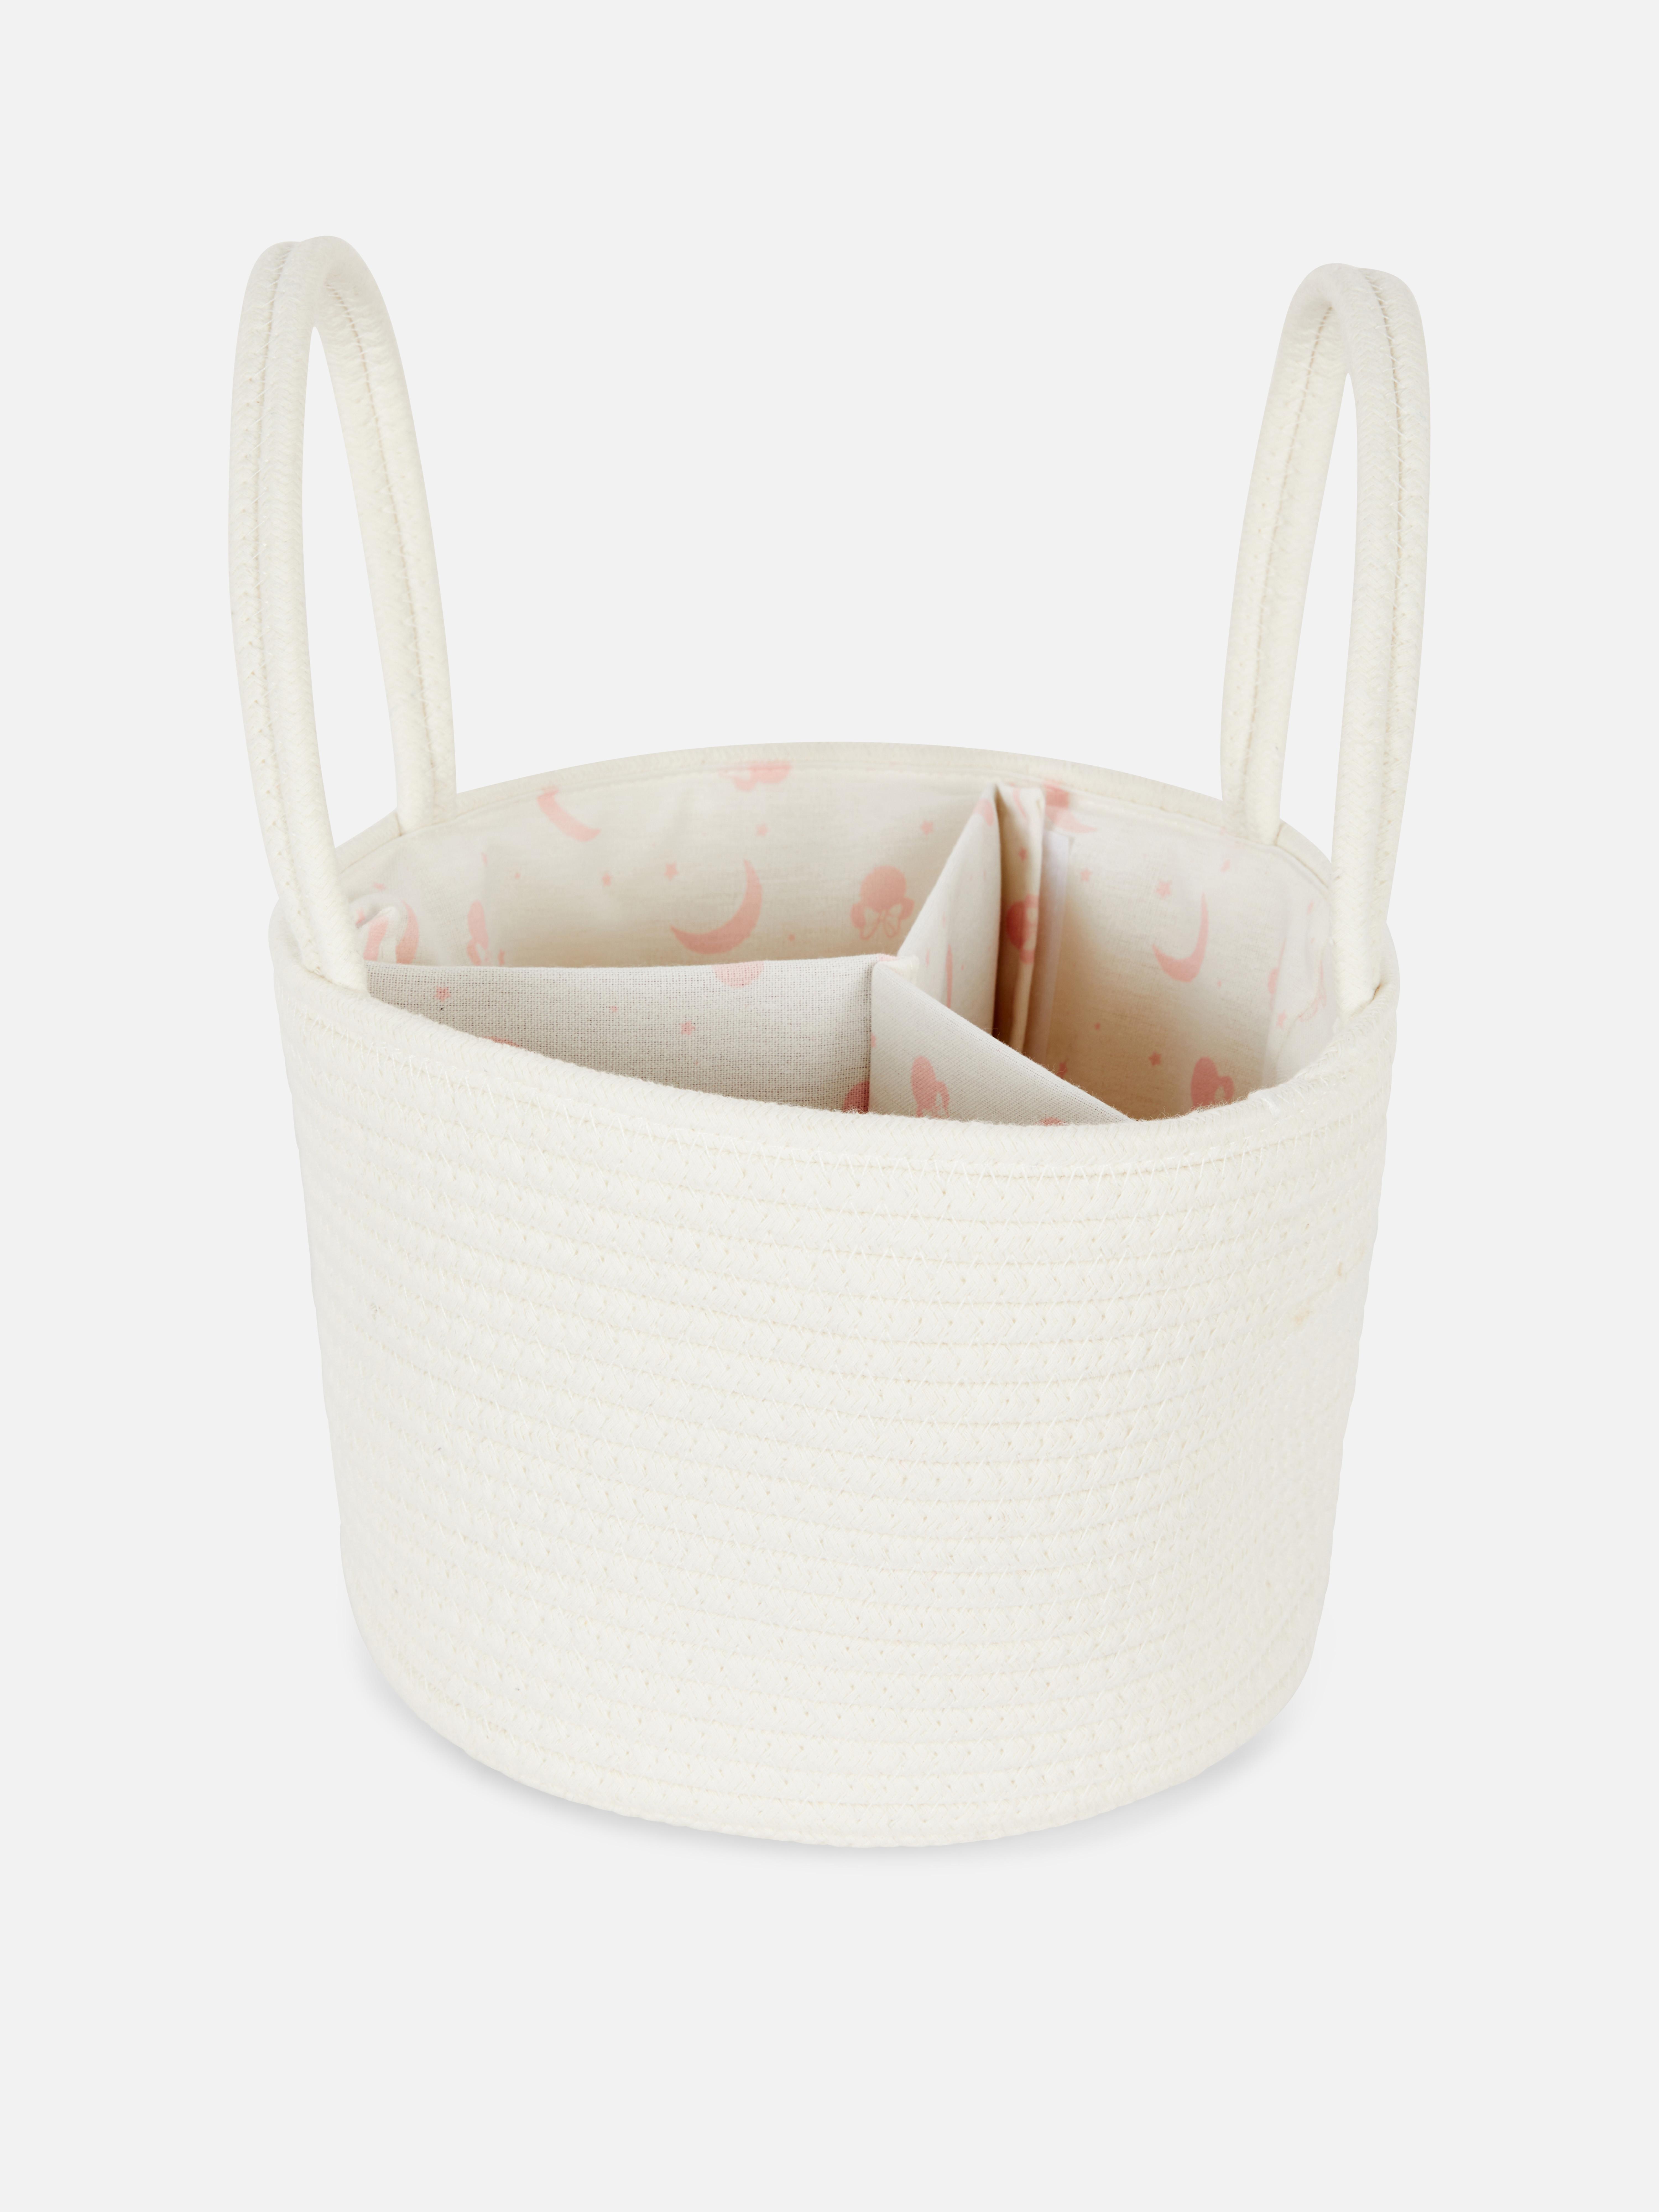 Disney’s Minnie Mouse Woven Section Storage Basket